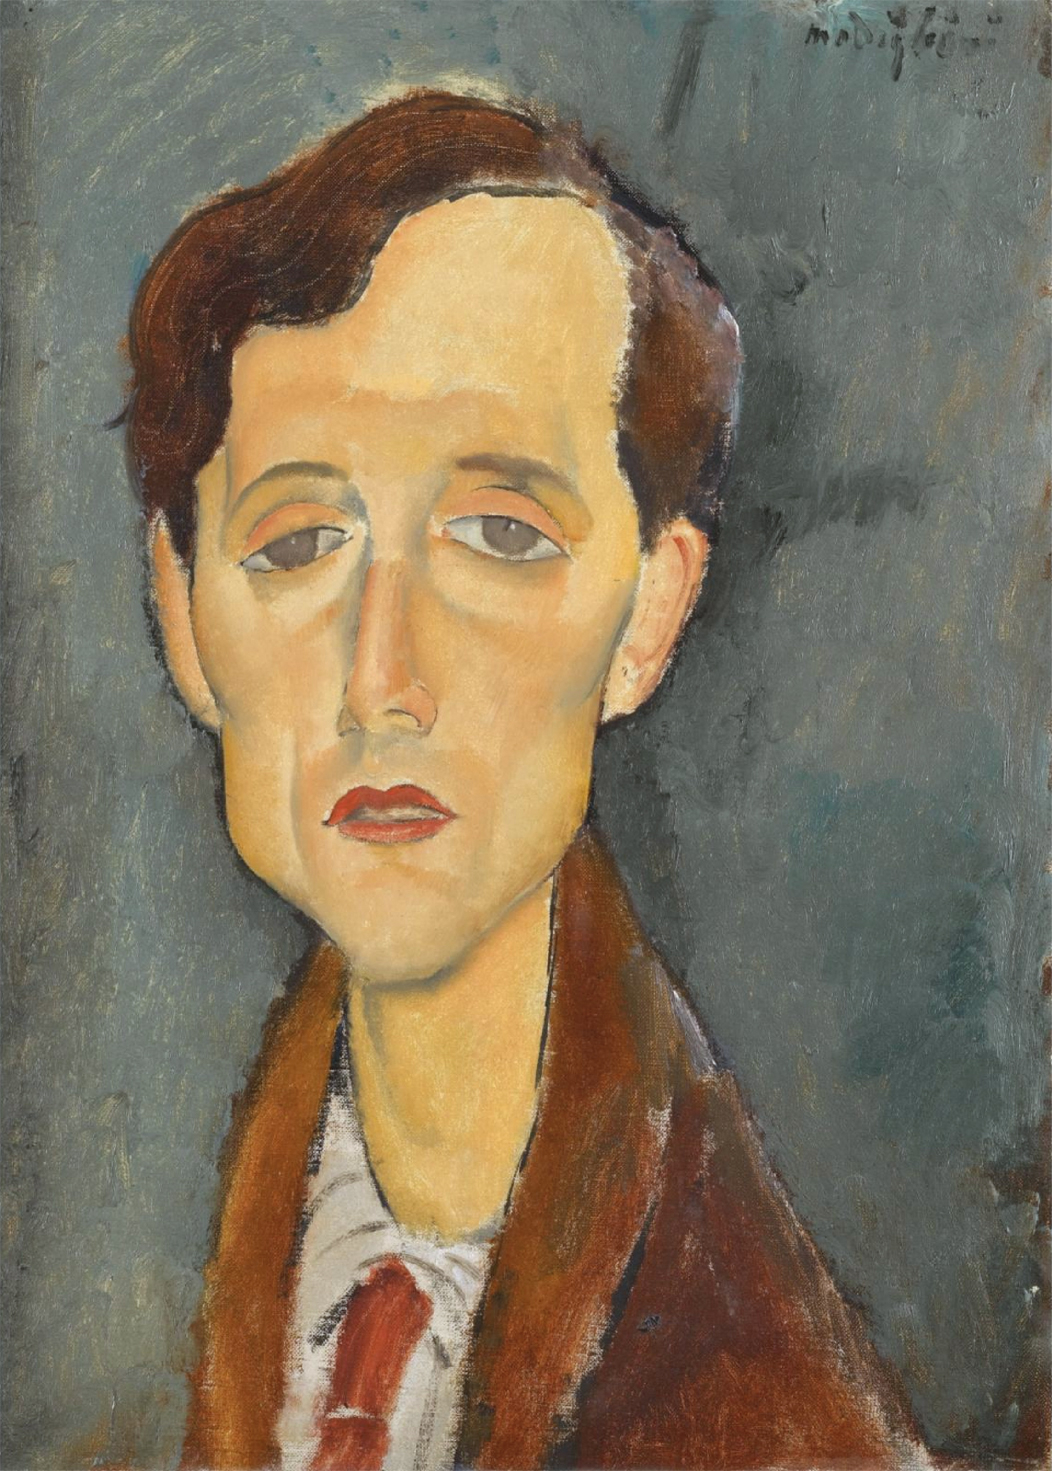 Frans Hellens by Amedeo Modigliani - 1919 - 46 x 34cm private collection